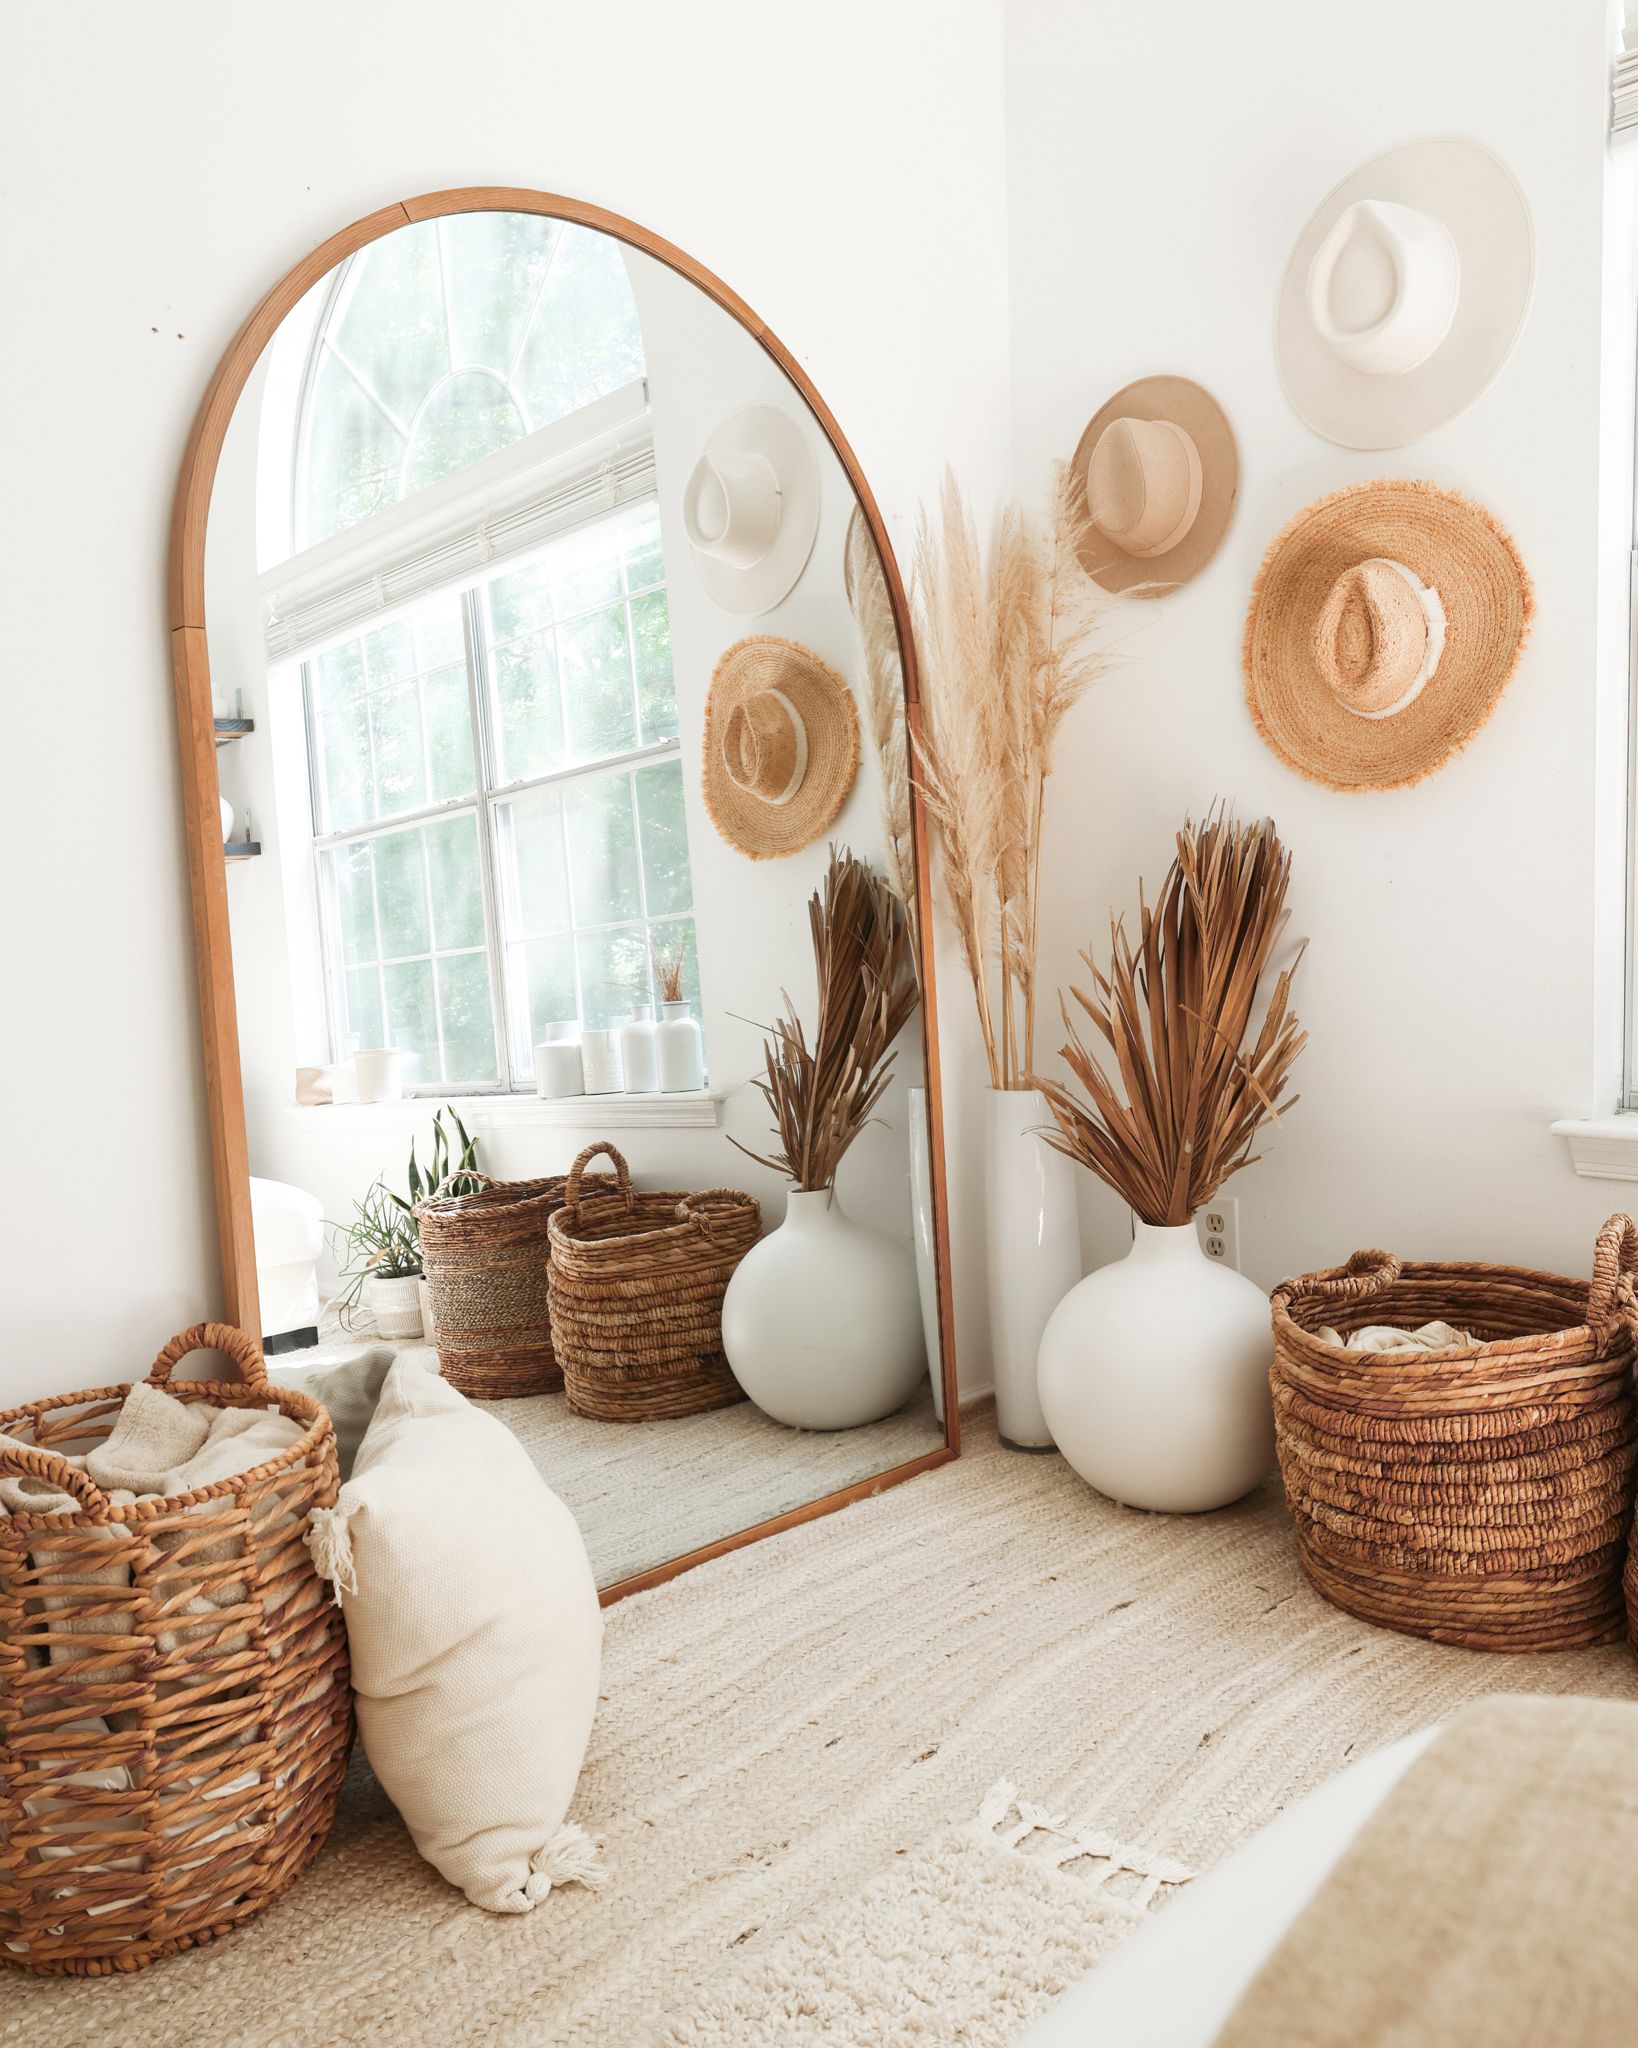 Arc Mirror with Bohemian Decorations